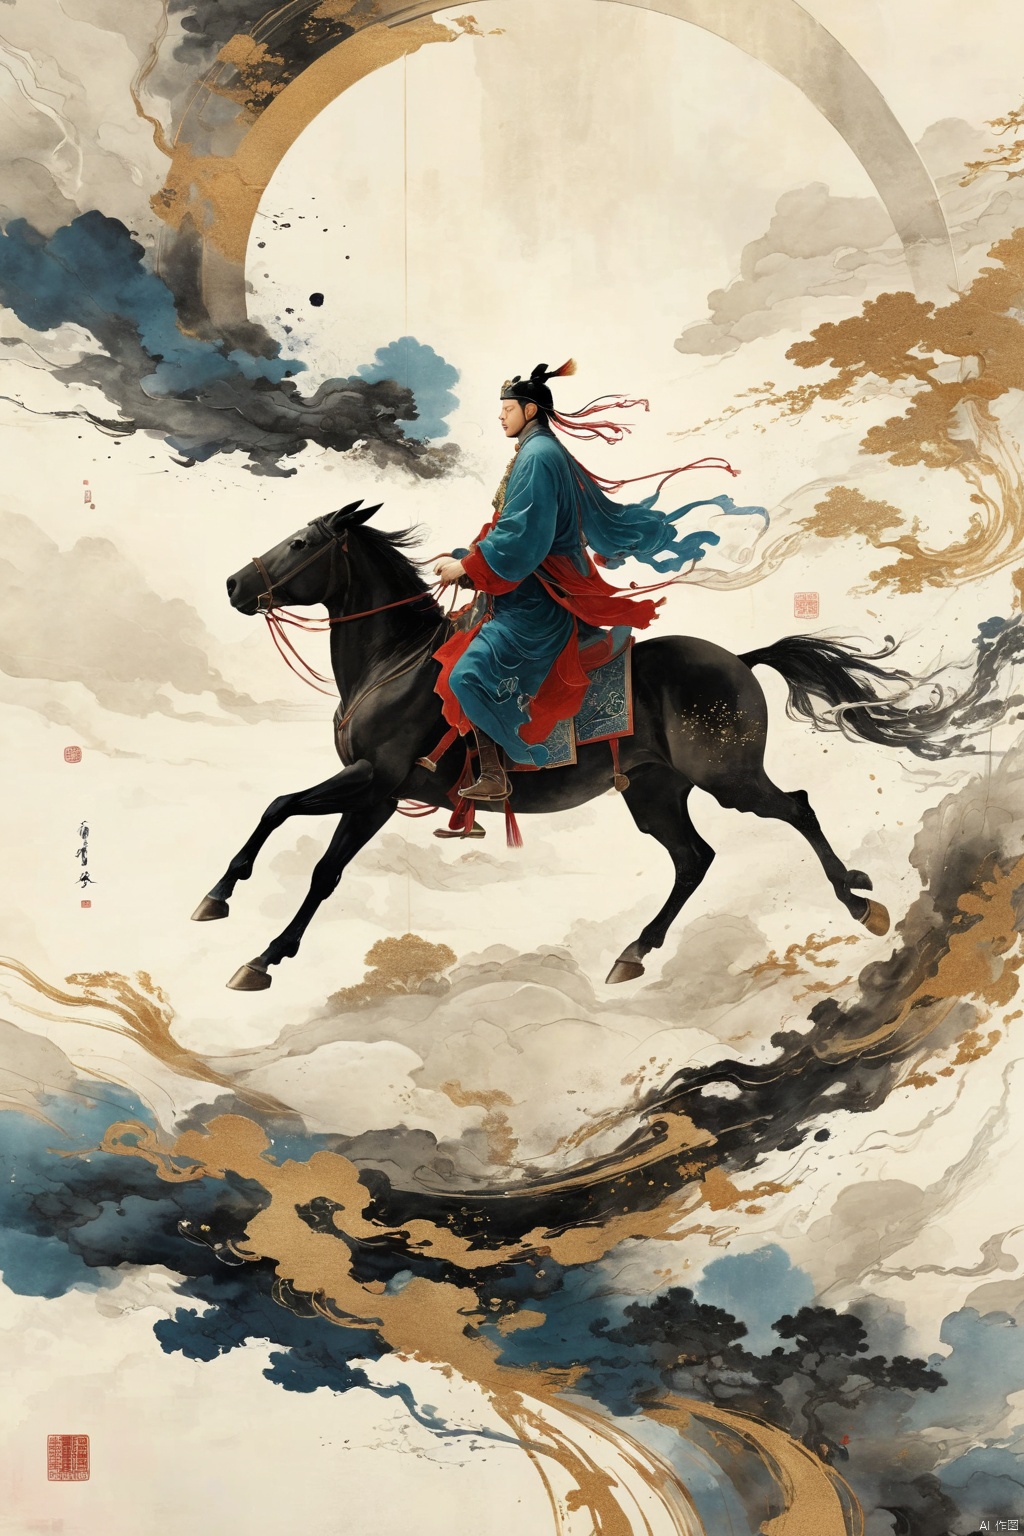  Chen Jialing, Ink Painting, Halo Dyeing, A man riding on a running horse,Conceptual Digital Art, Minimalism, Master Composition, Romantic Ancient Style, New Gongbi, Surrealism